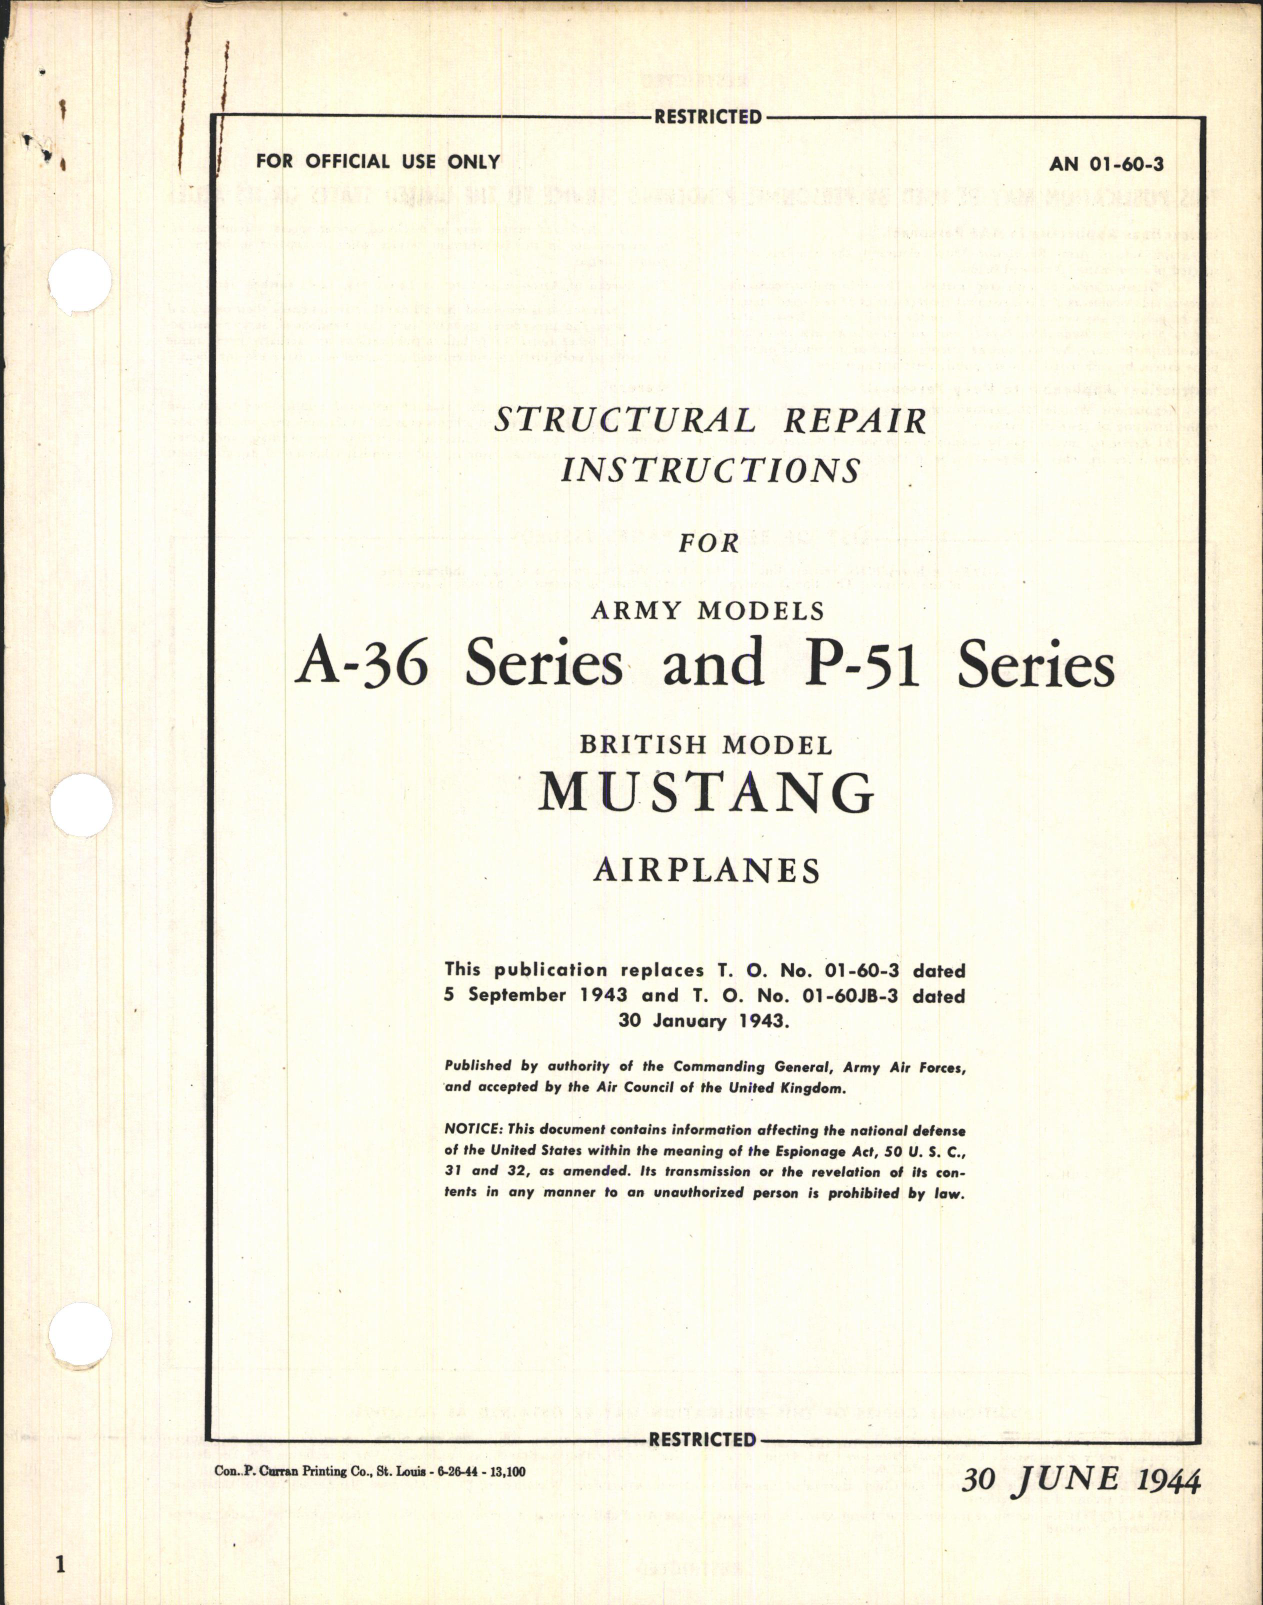 Sample page 7 from AirCorps Library document: Structural Repair Instructions for A-36 Series and P-51 Series